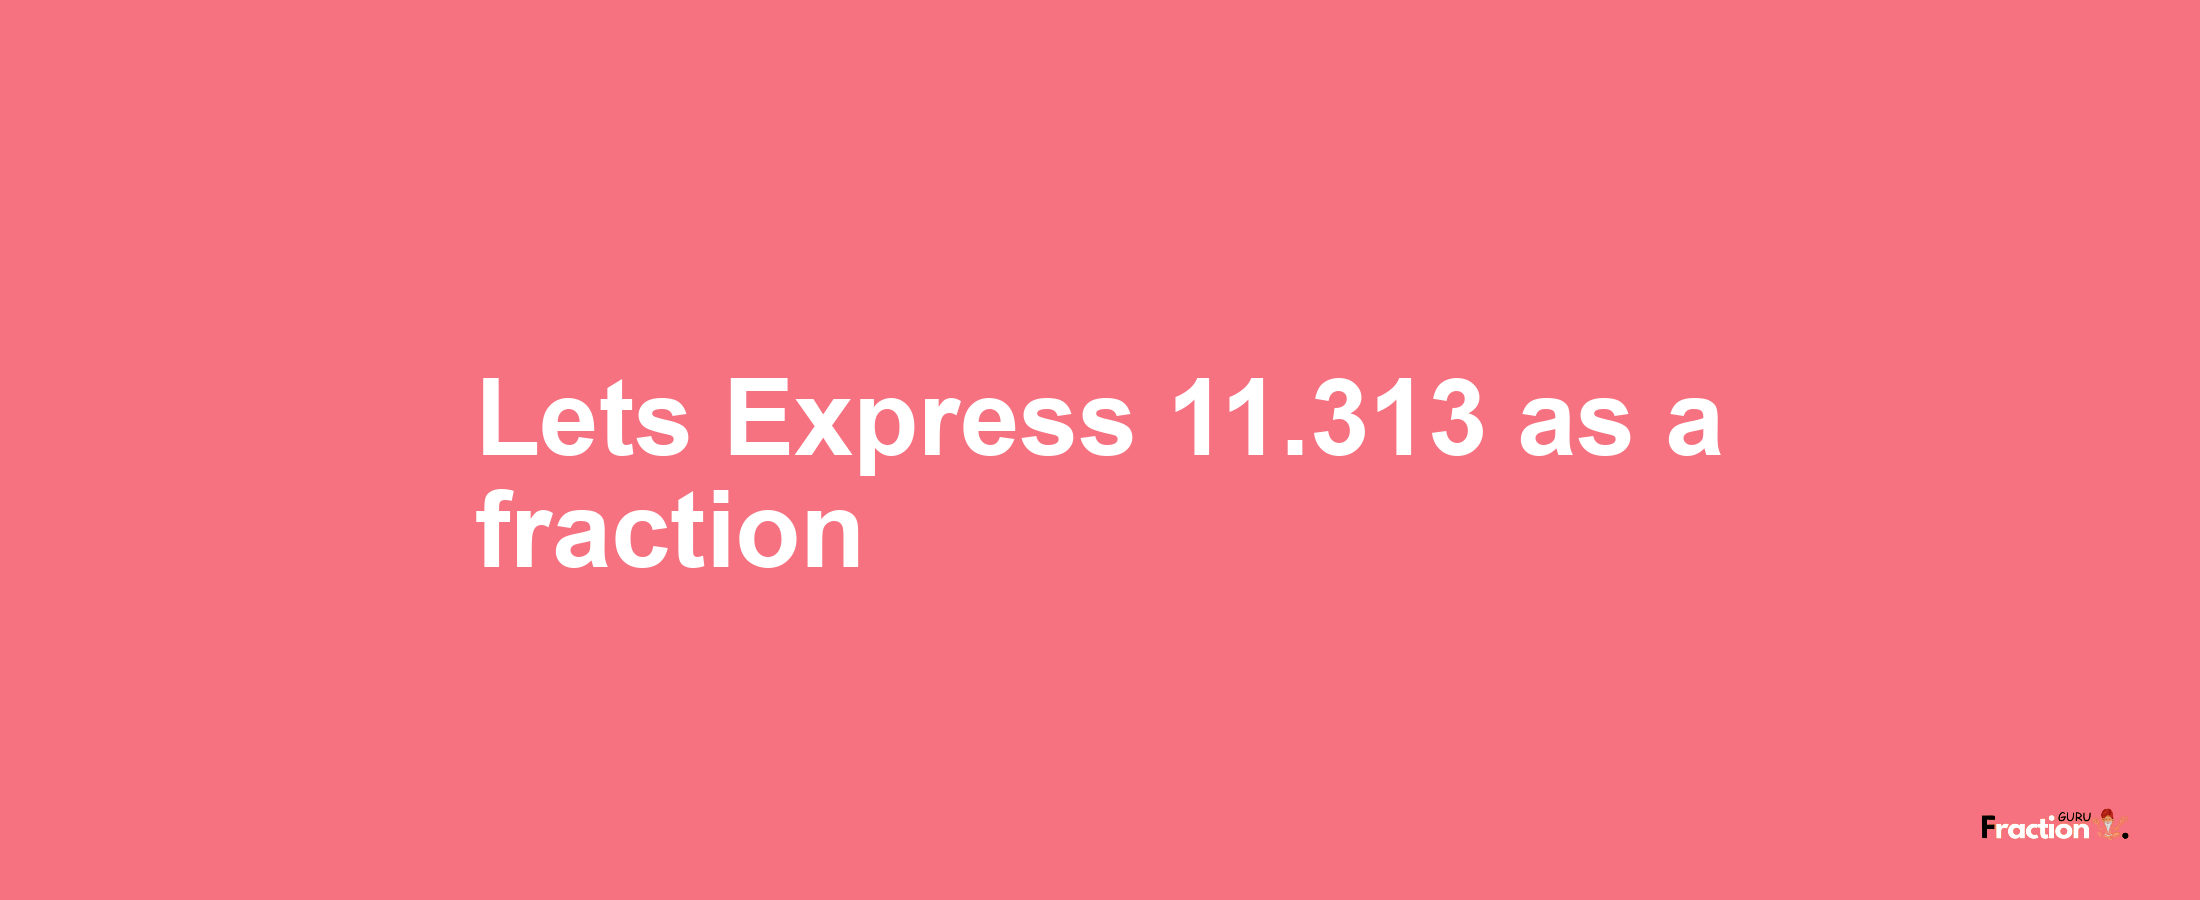 Lets Express 11.313 as afraction